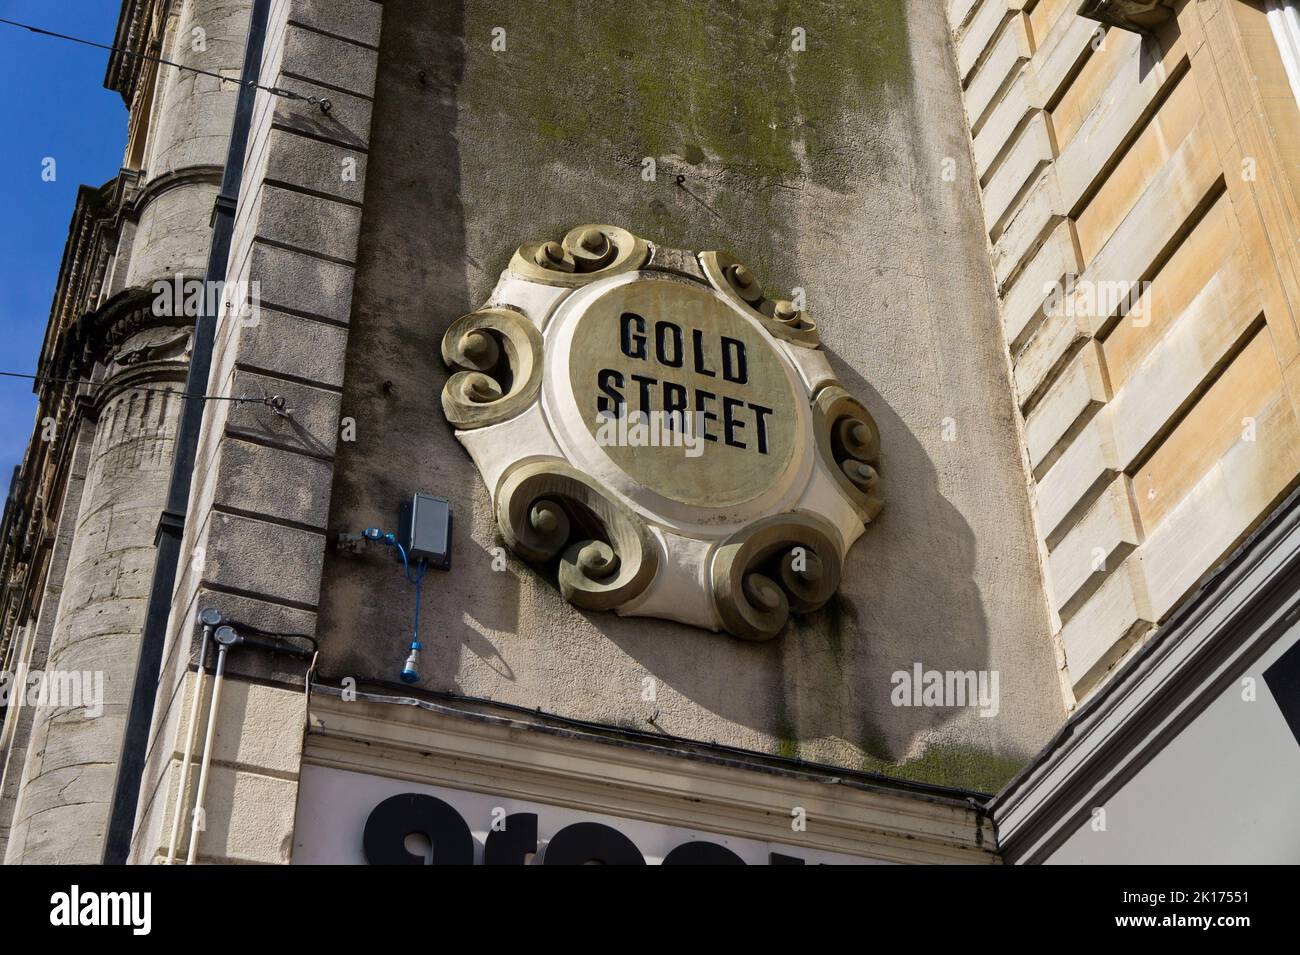 Ornate wall mounted sign for Gold Street, in the town centre, Northampton, UK Stock Photo